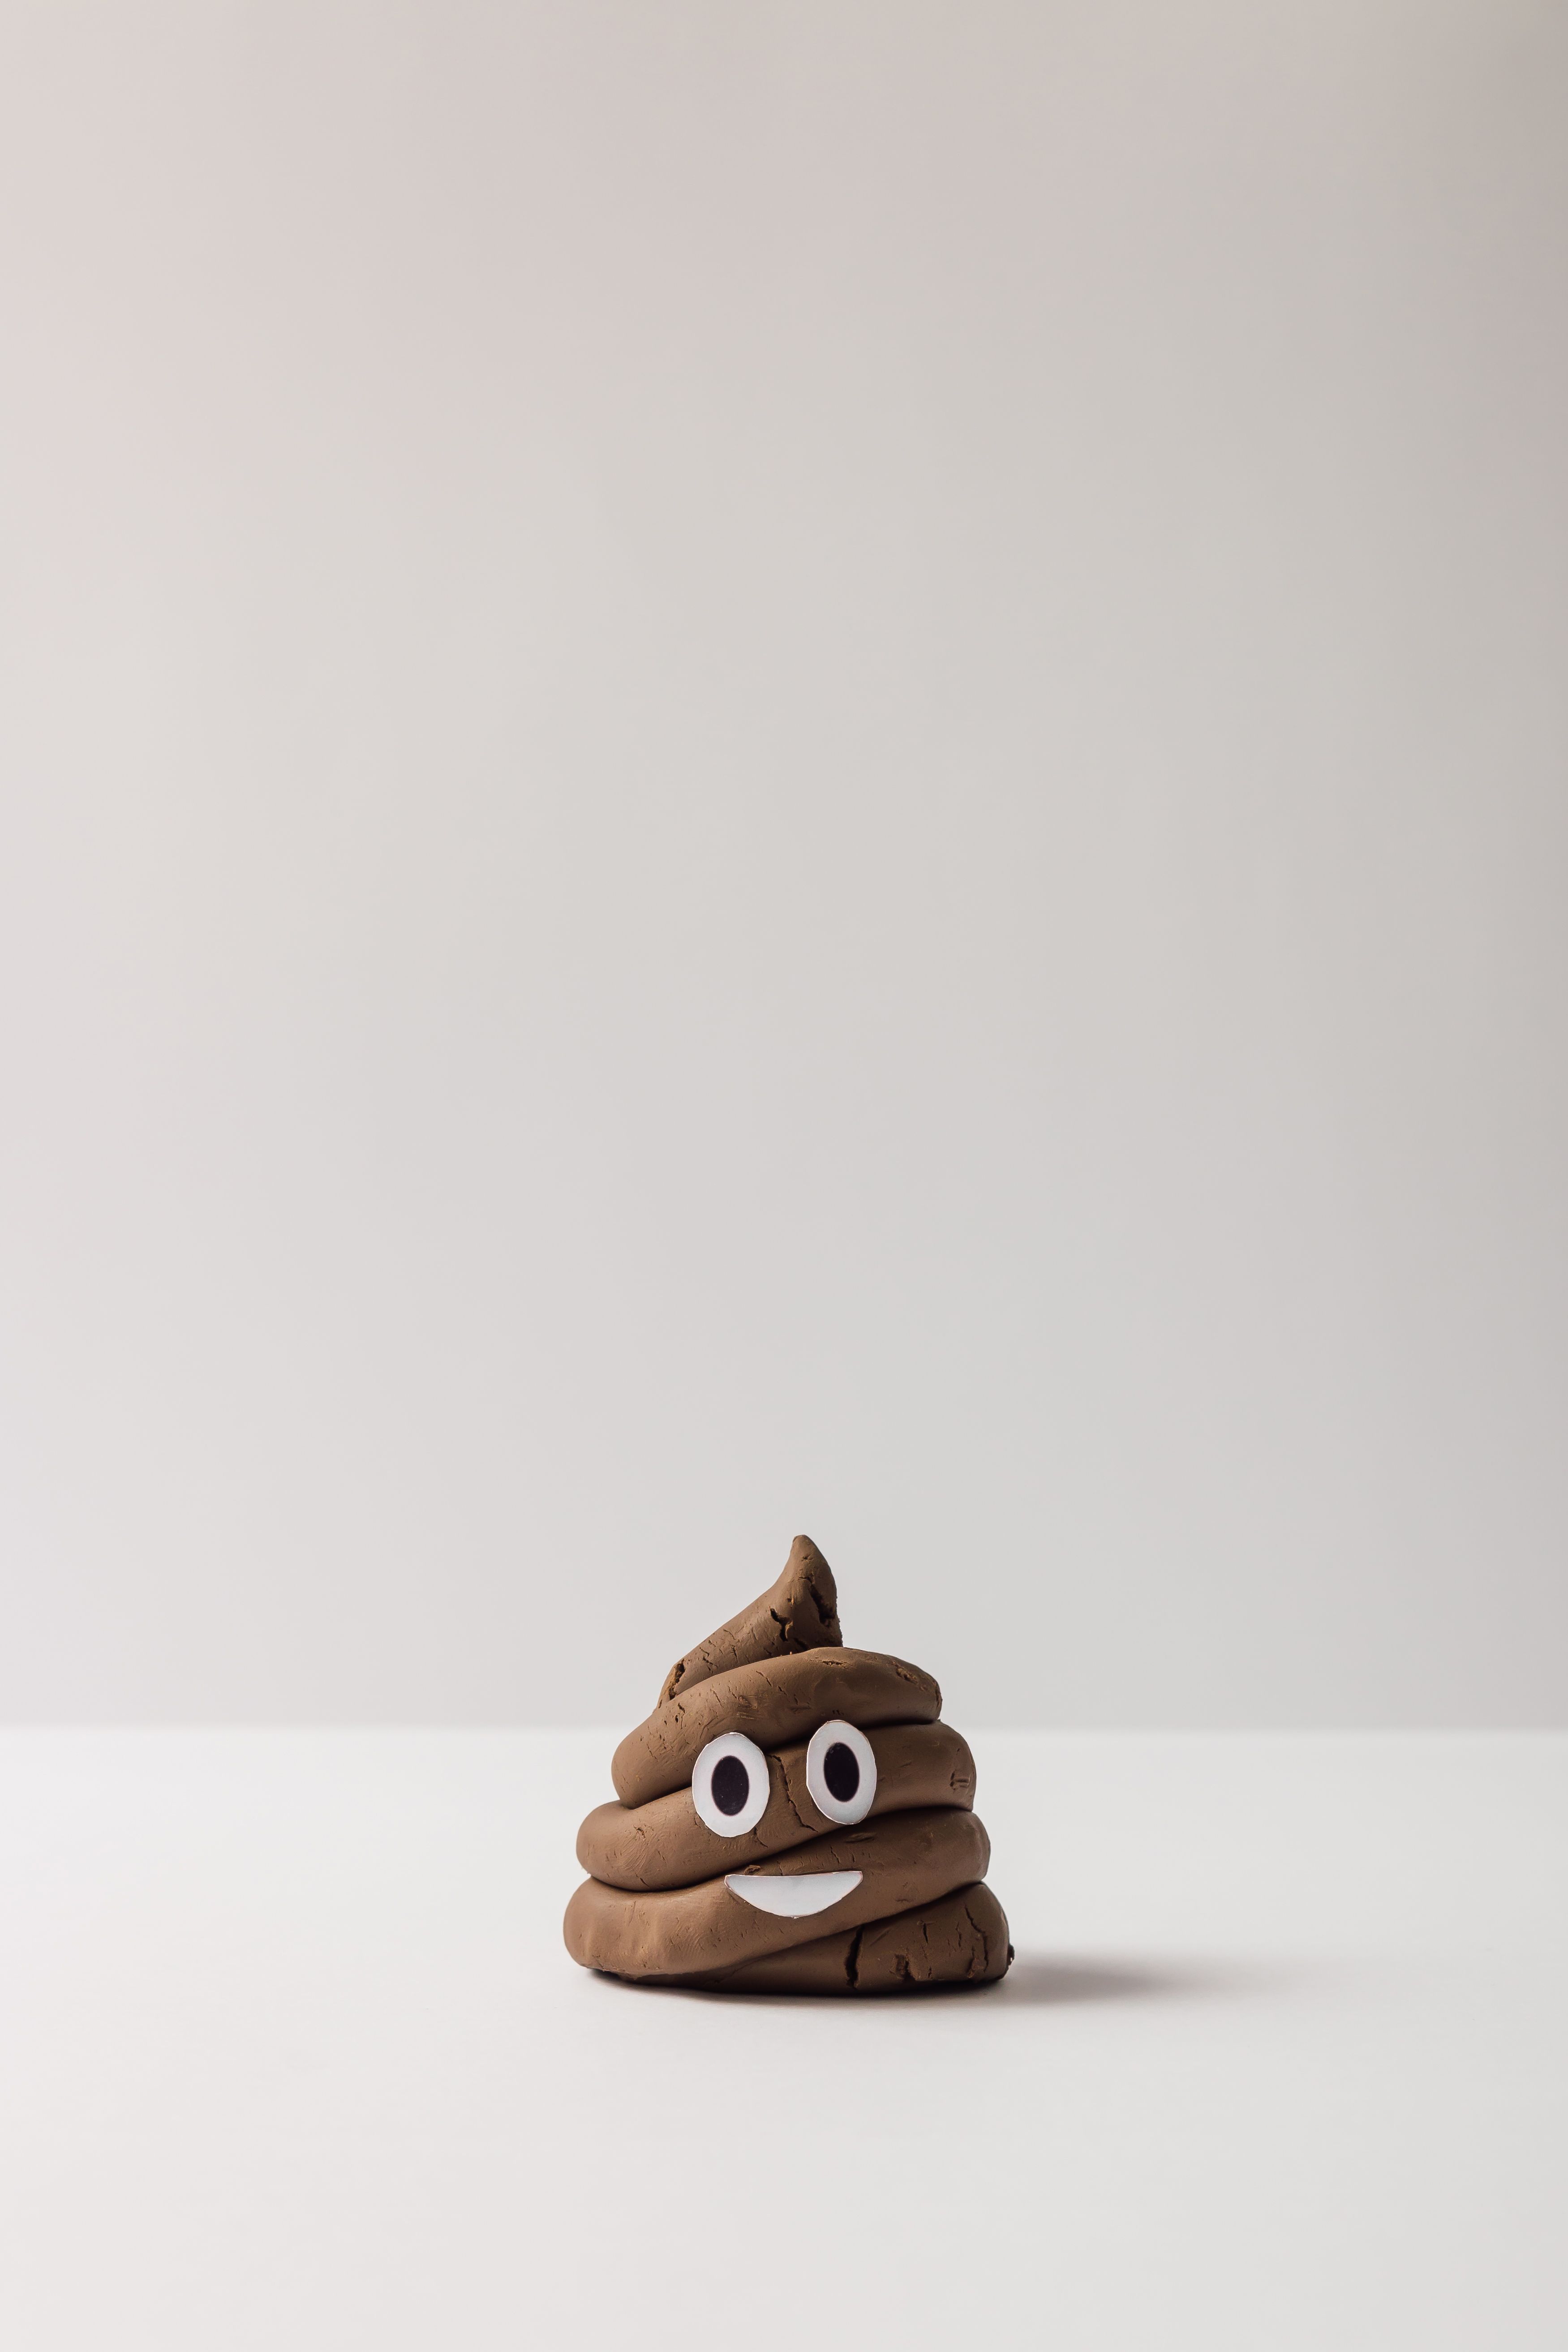 Why Does it Feel Good to Poop? image photo pic